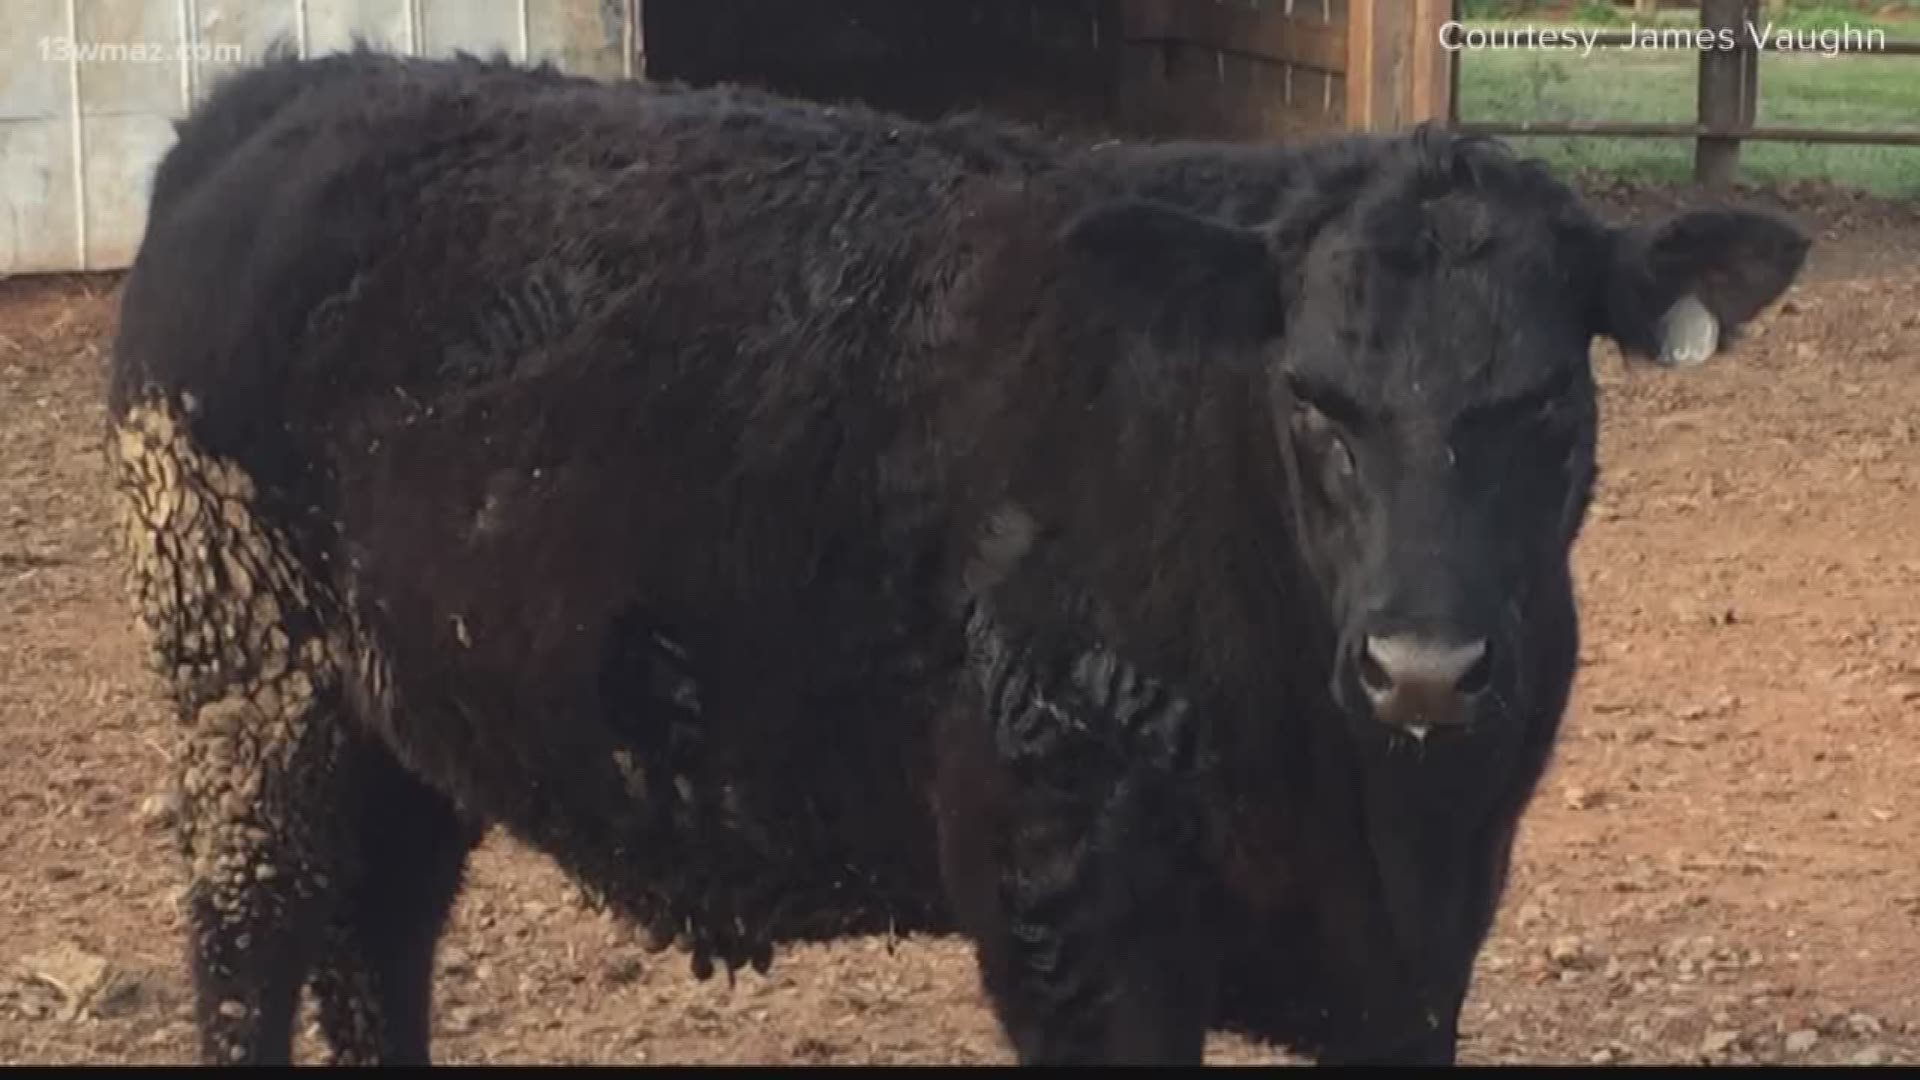 The United States Cattlemen's Association is asking the Department of Agriculture for help during the coronavirus pandemic.